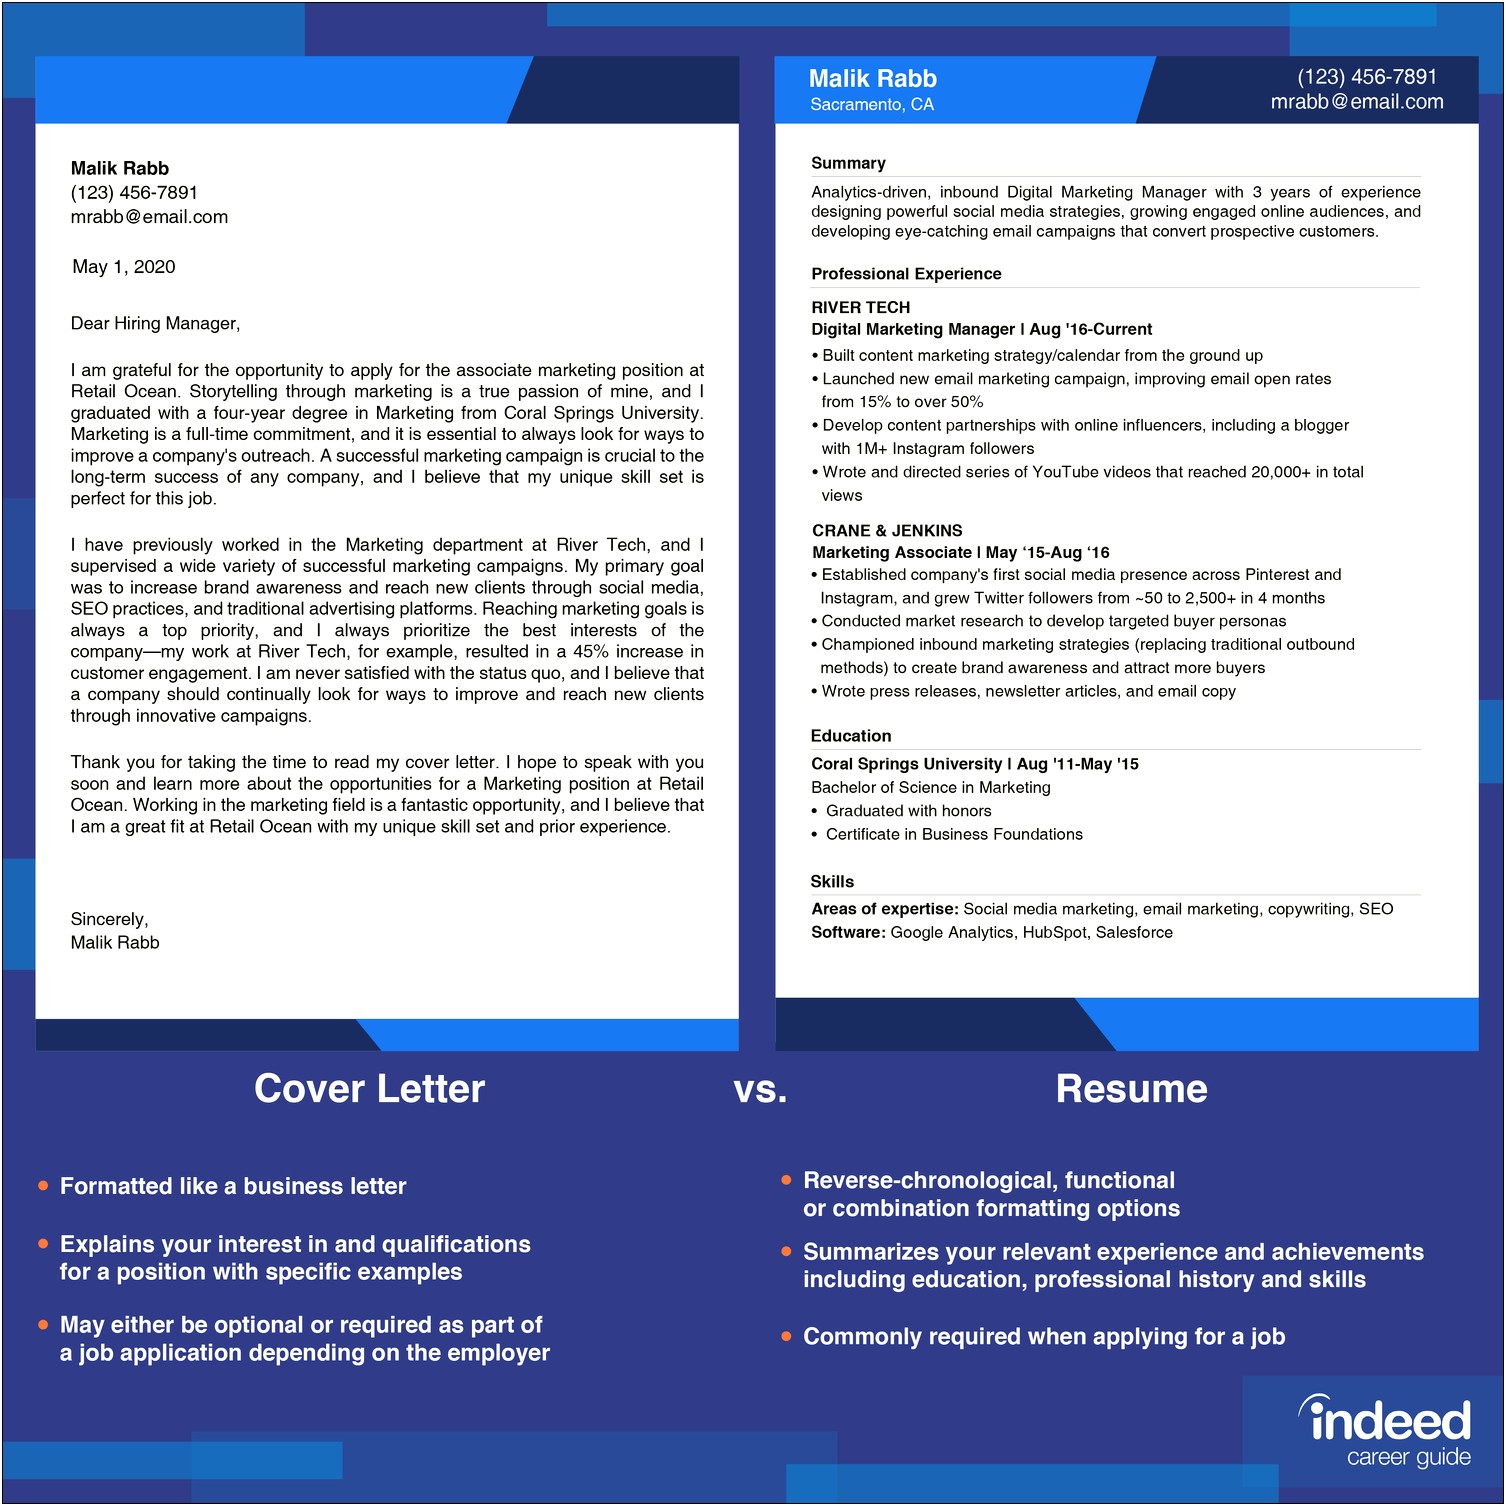 Resume And Cover Letter As A Single Document